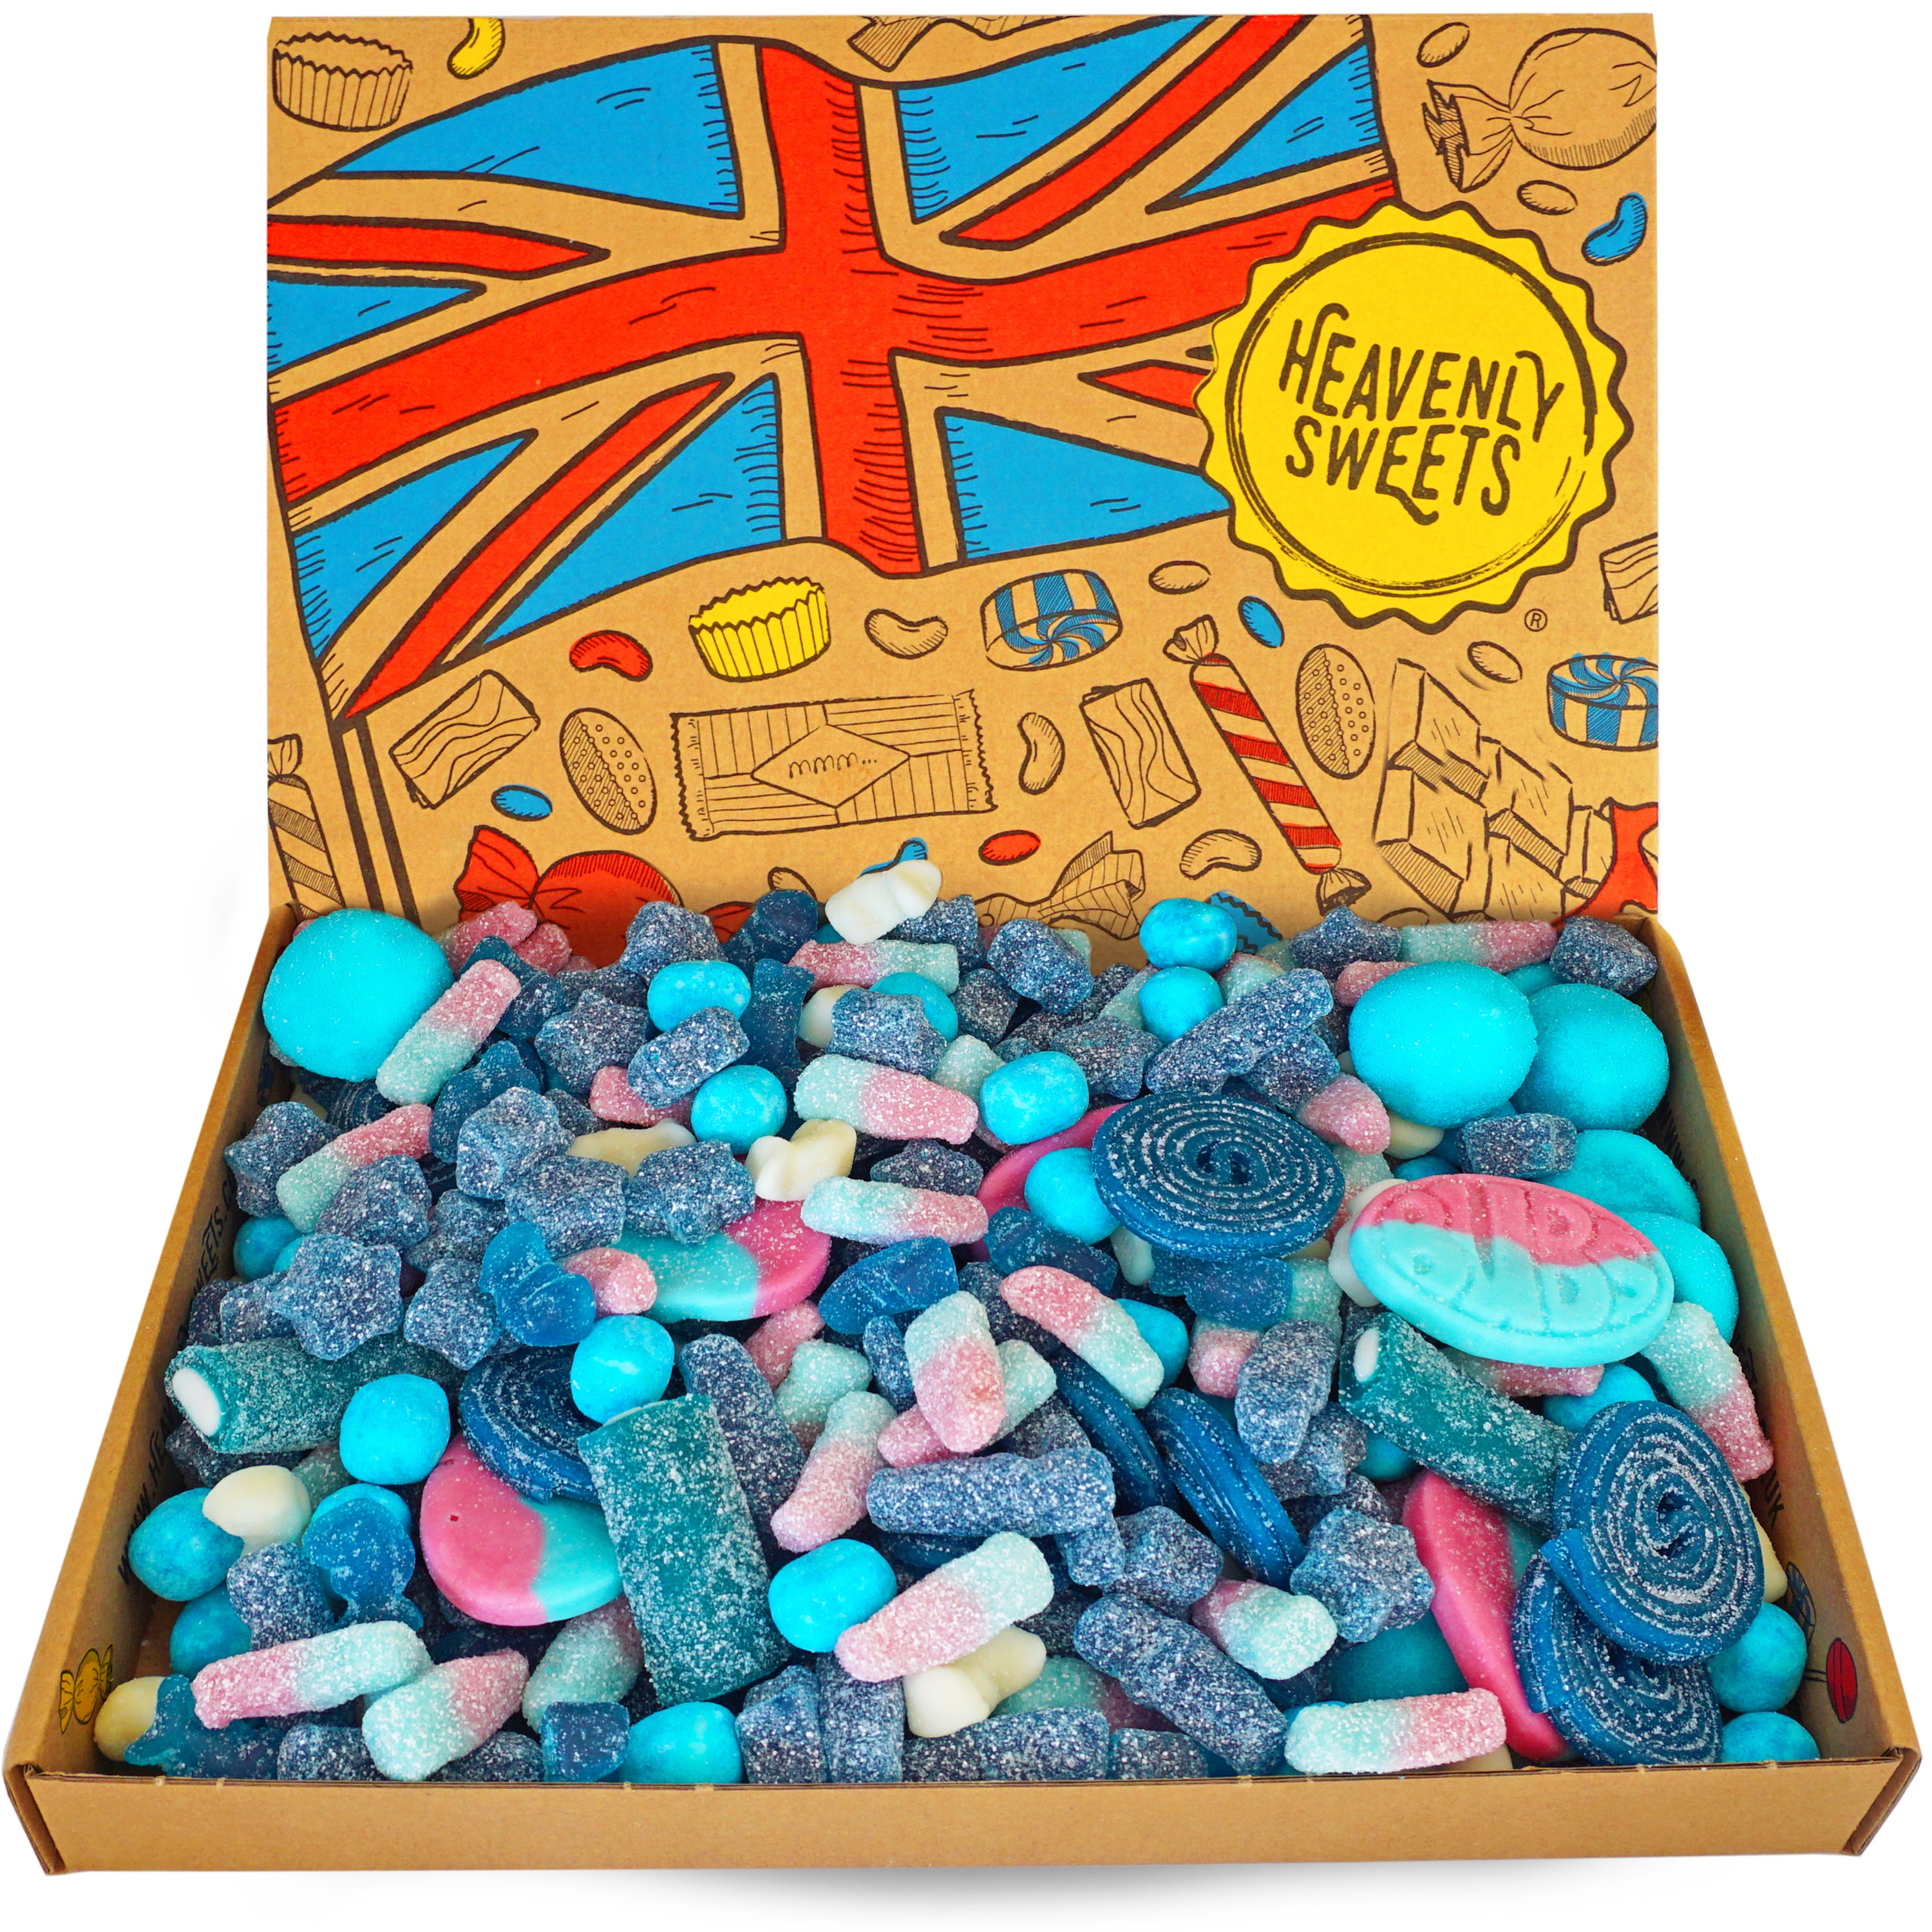 Pick 'n Mix Sweets Gift Box - Blue Sweets - Heavenly Sweets